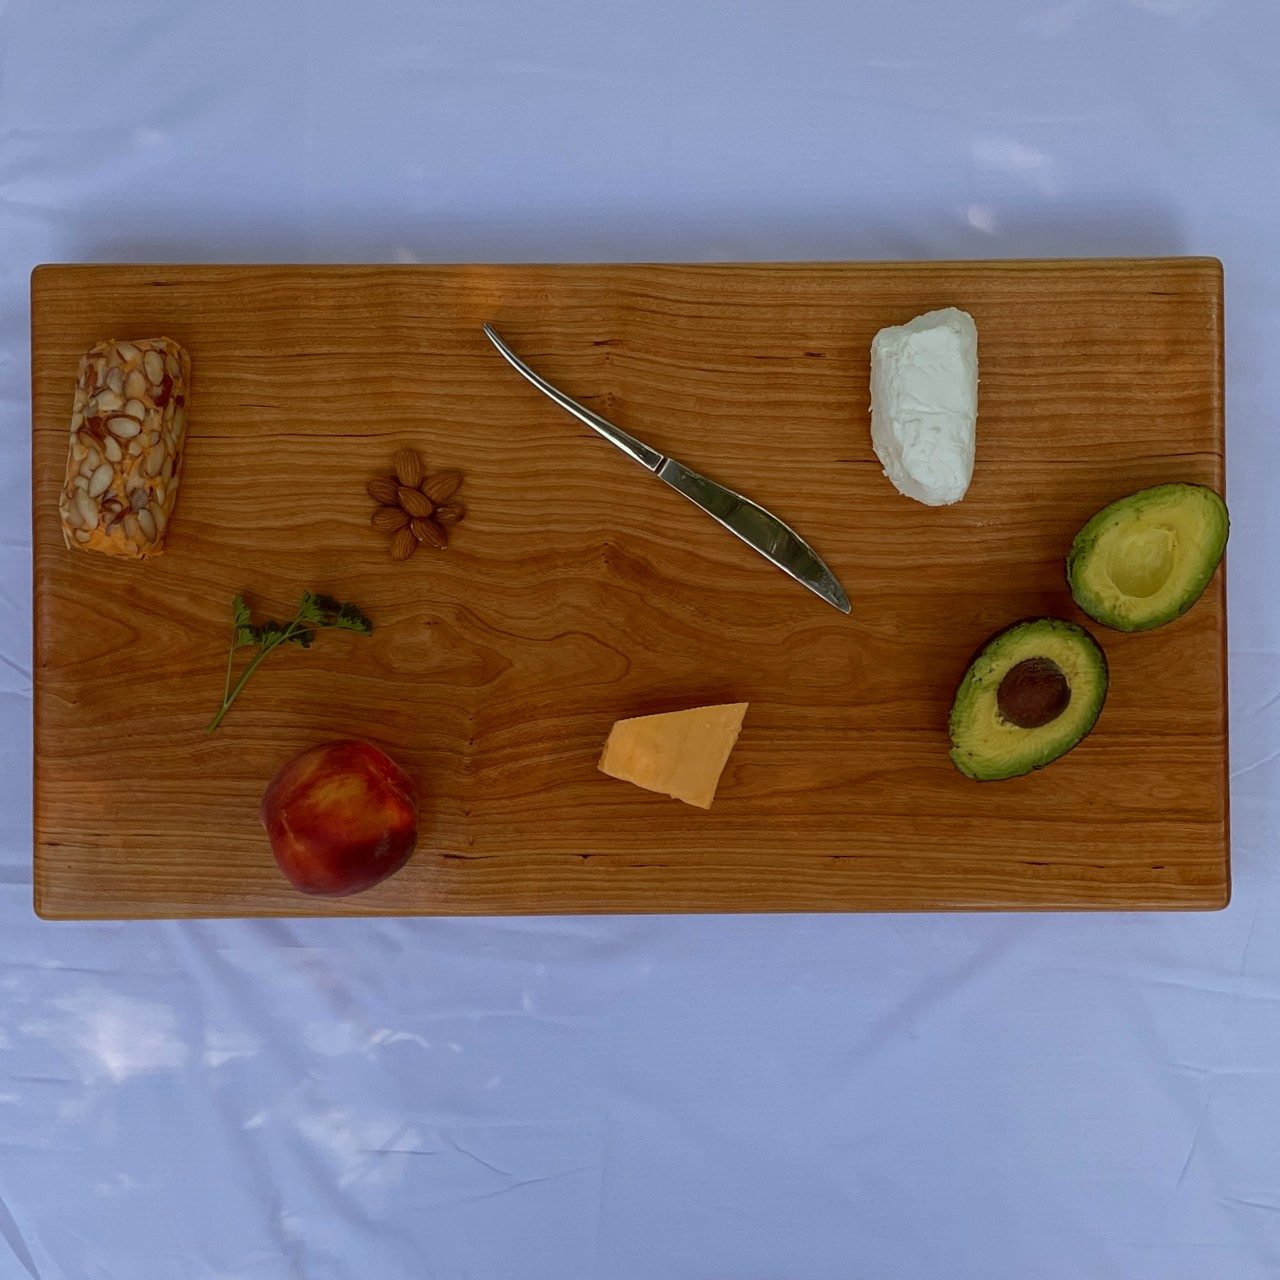 https://cdn11.bigcommerce.com/s-1vey7r6116/images/stencil/1280x1280/products/136/522/cherry-serving-board-by-Treeboard-cheese-hands-avocado-from-above__34244.1693096774.jpg?c=1